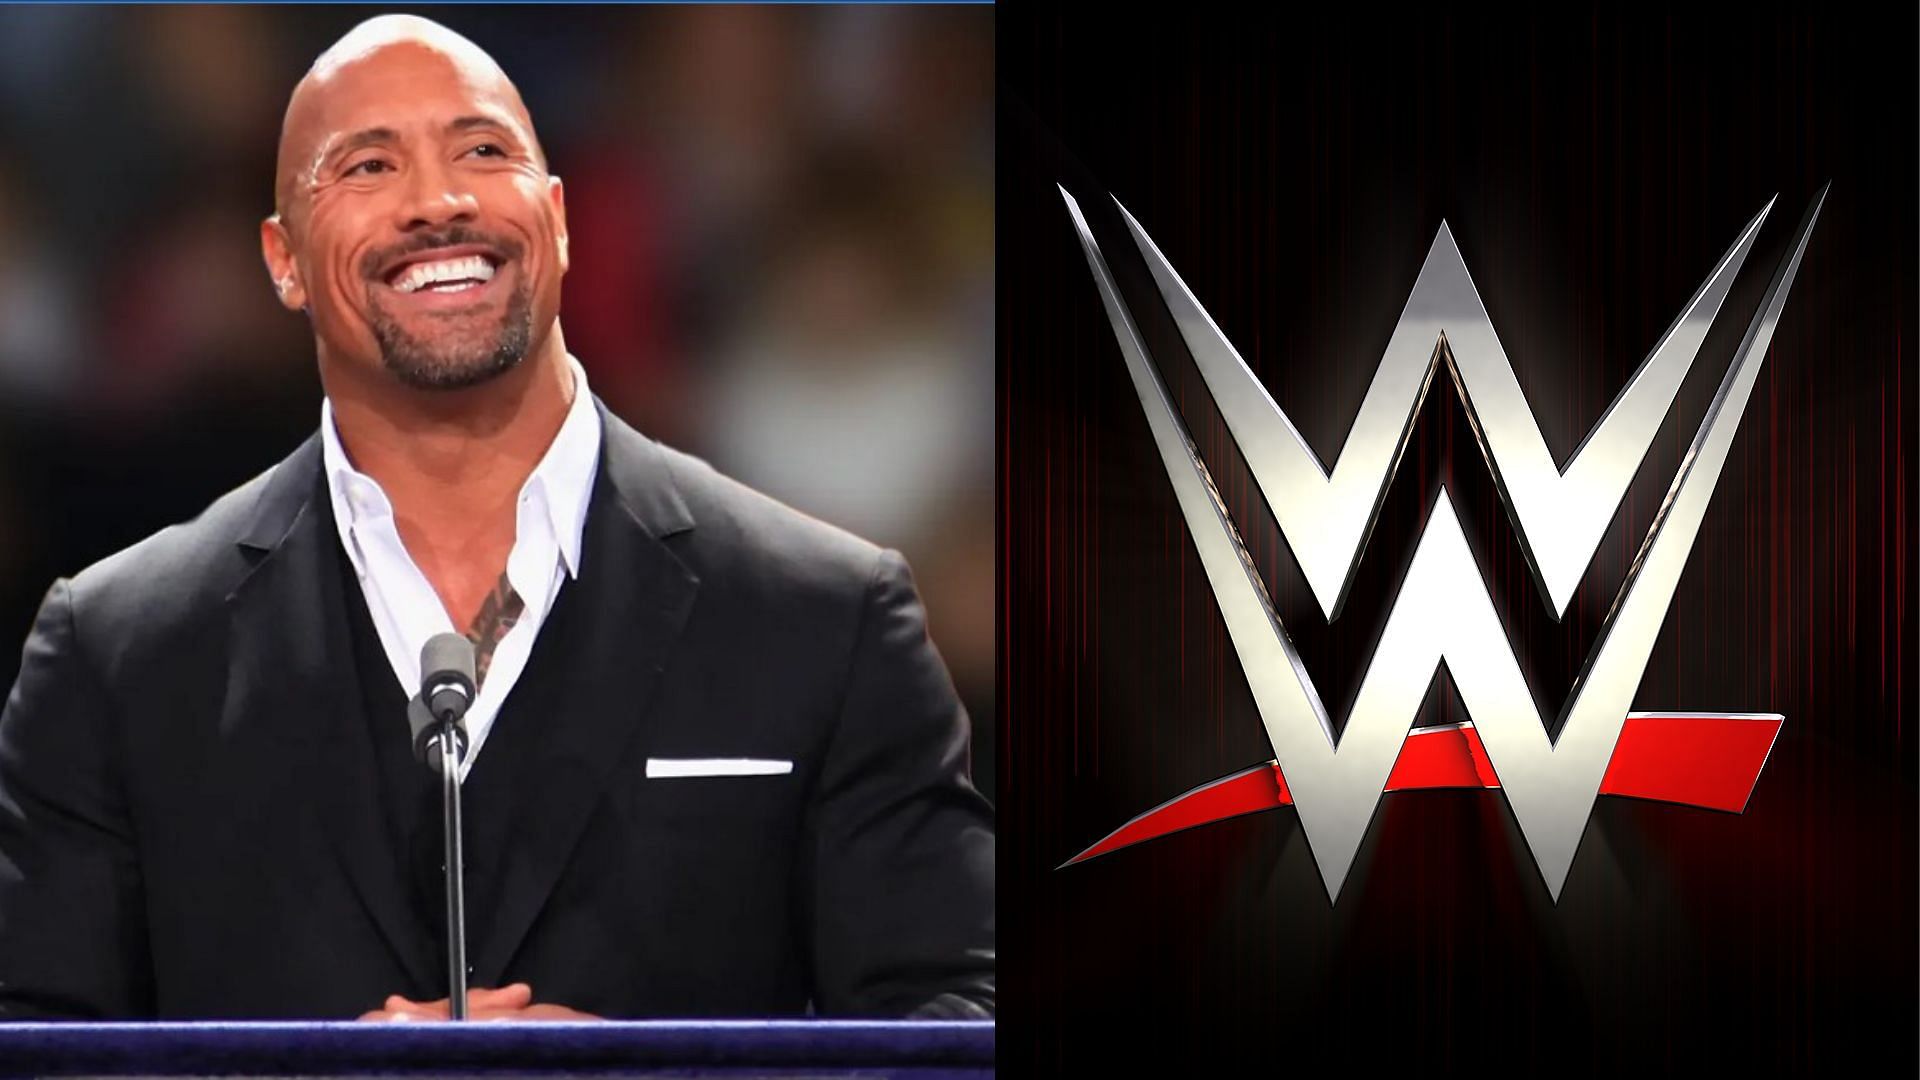 Dwayne Johnson is aware of a potential WWE sale